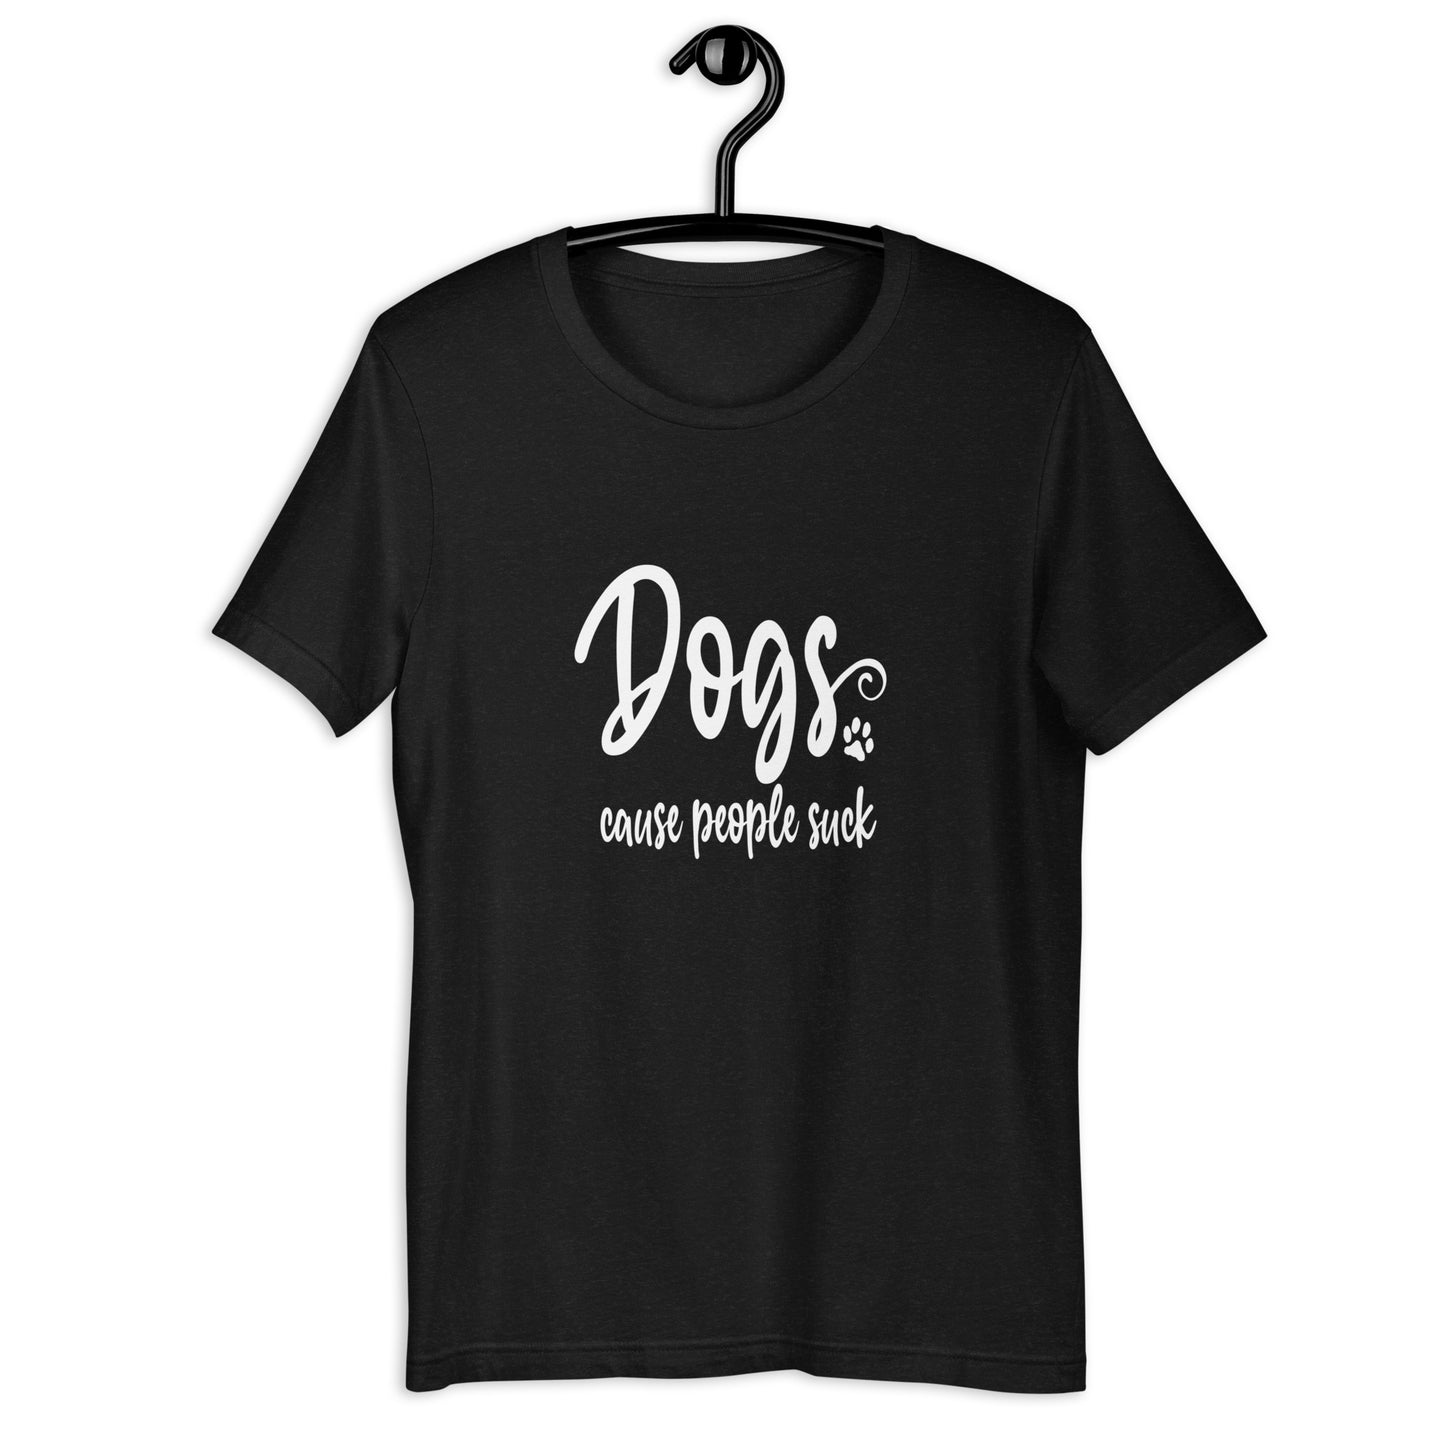 DOGS, CAUSE PEOPLE SUCK - Unisex t-shirt